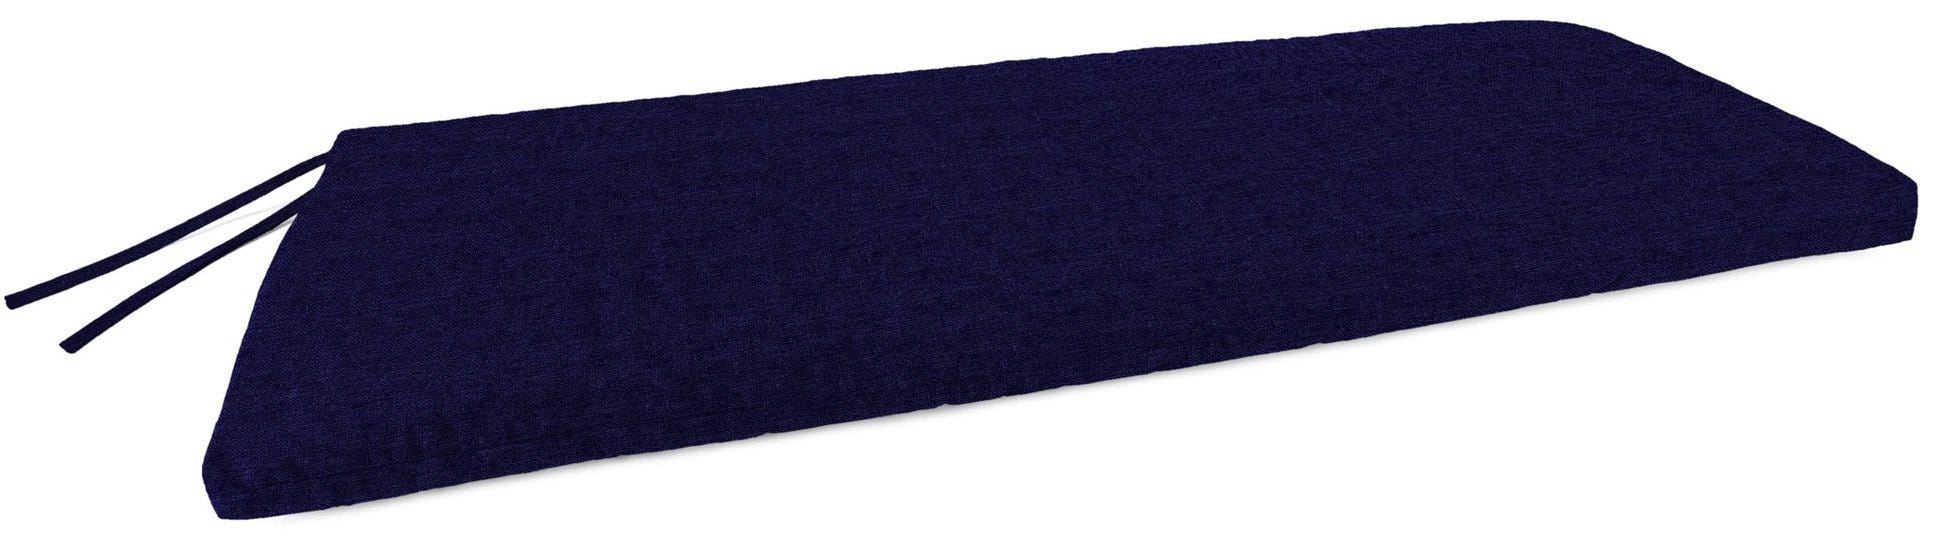 mainstays-solid-navy-outdoor-patio-bench-cushion-1